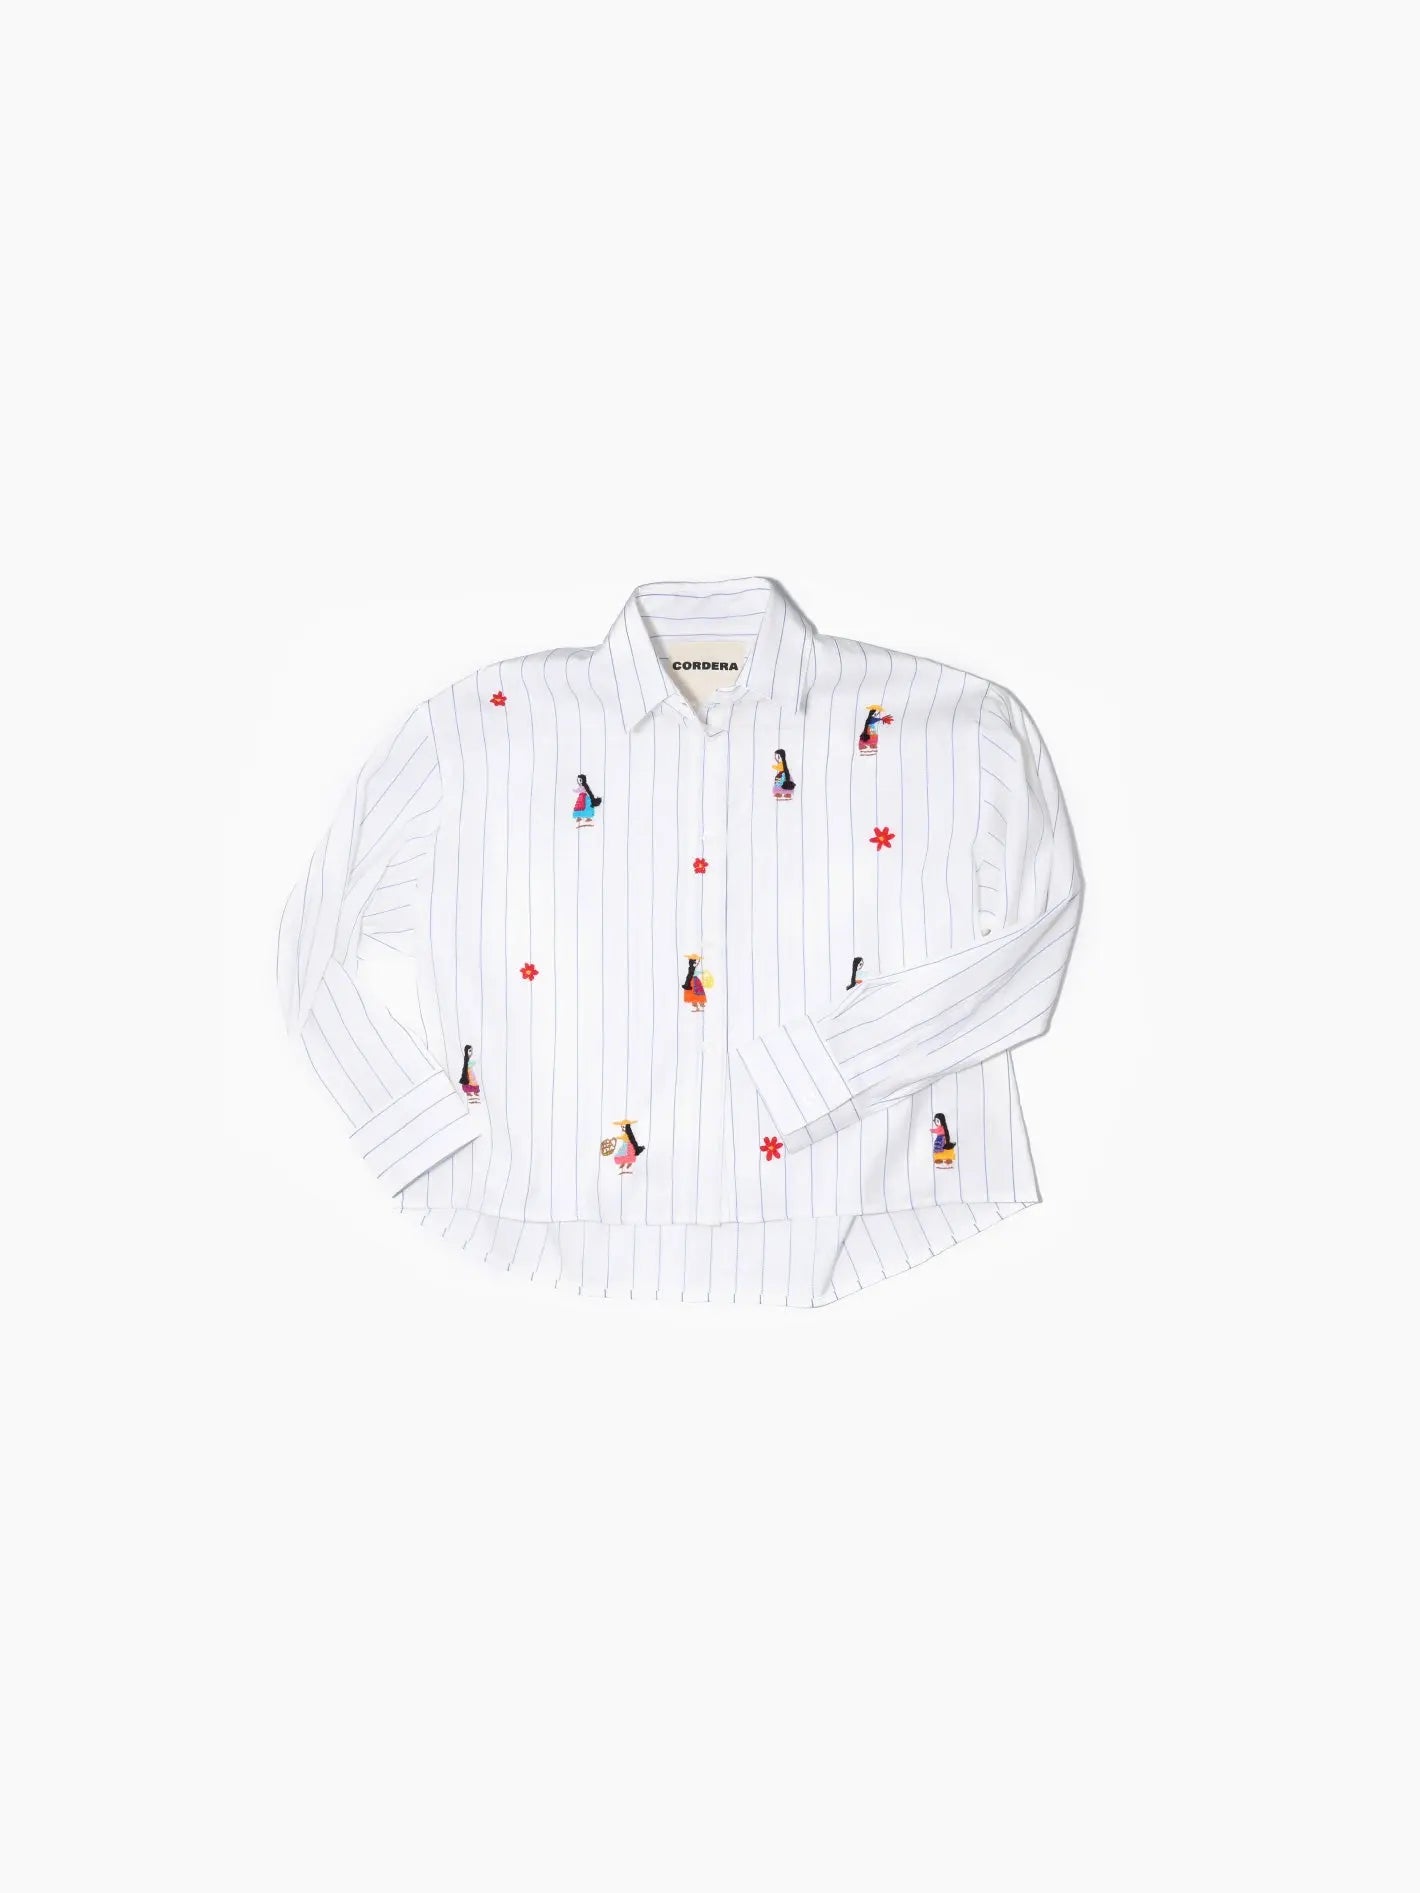 A Cordera Hand-Embroidered Shirt, available at bassalstore, is laid flat against a plain white background. It is a white long-sleeved button-up shirt with thin vertical stripes and various multicolored embroidered figures and red stars scattered across the fabric.